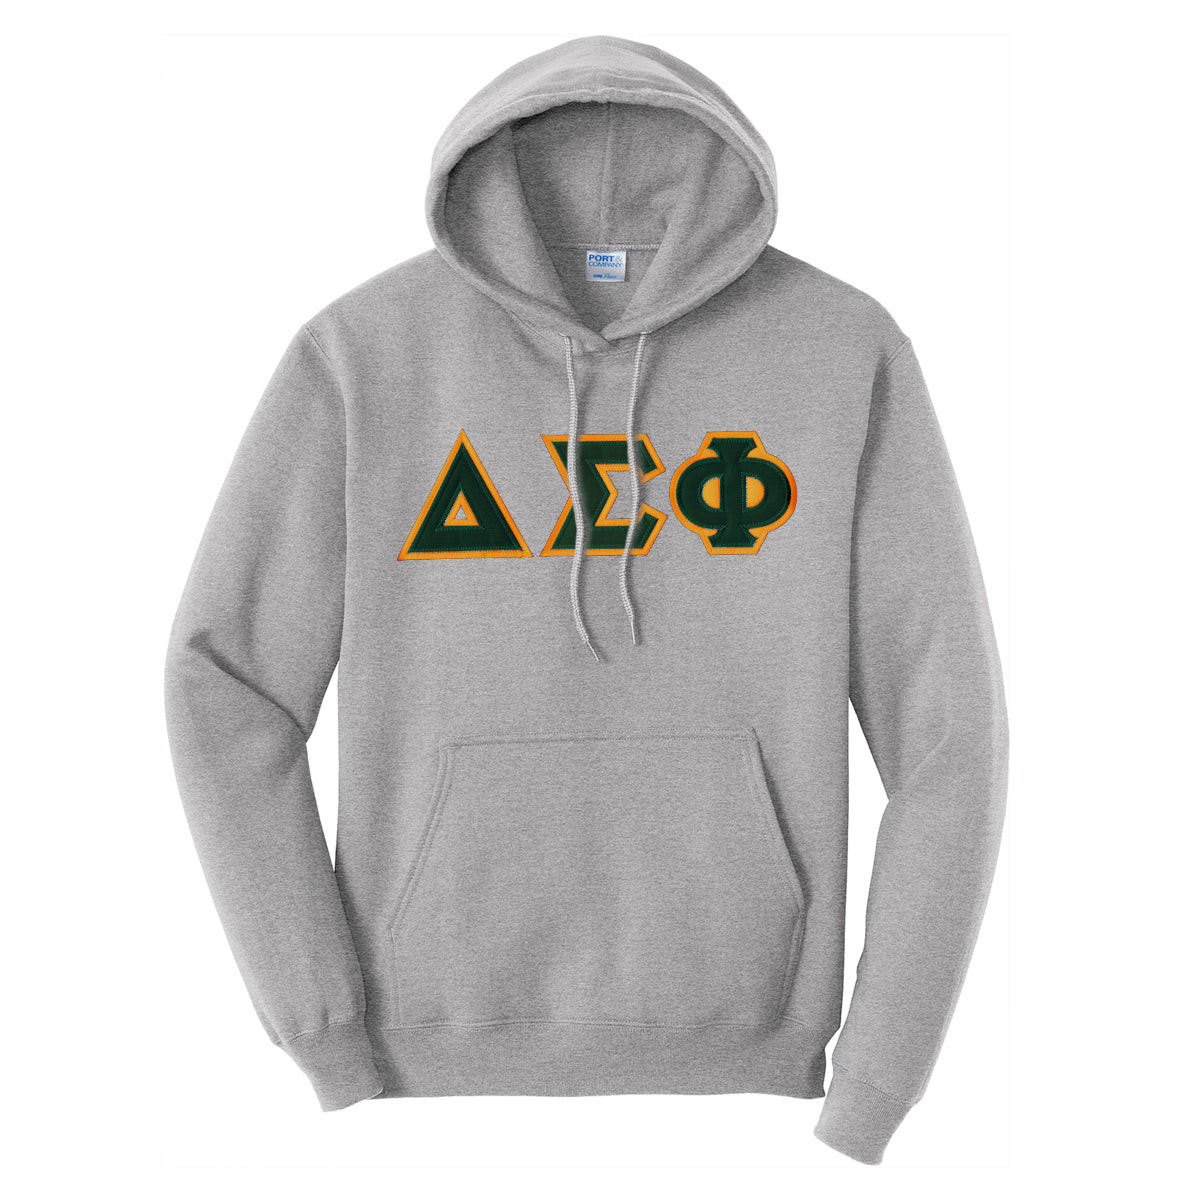 Delta Sig Store Delta Sig Heather Gray Hoodie with Sewn On Letters